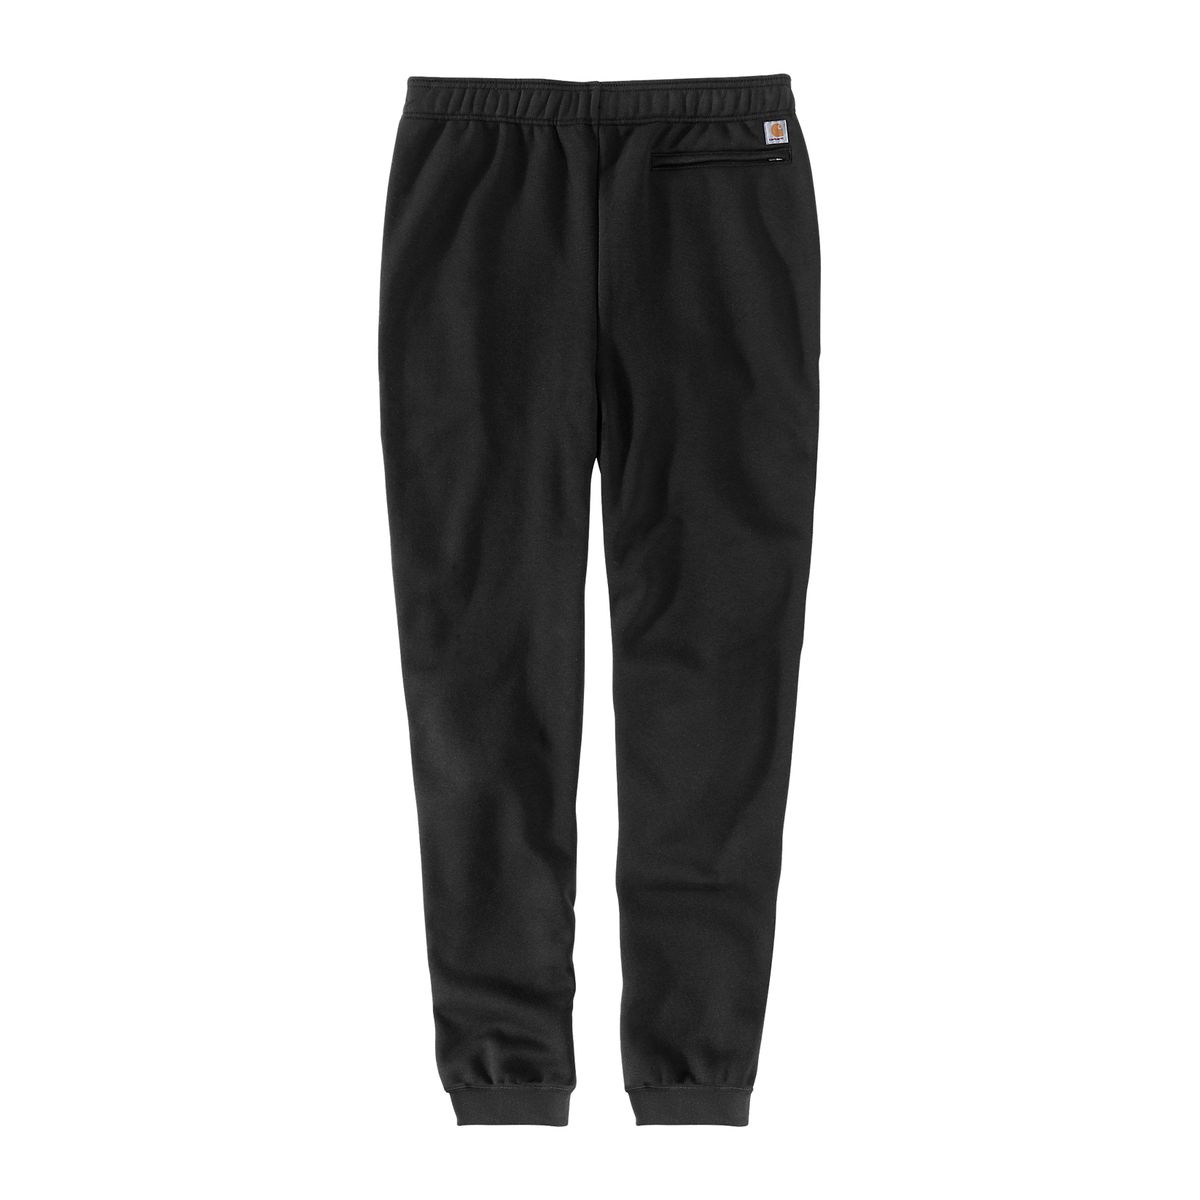 Men's Midweight Tapered Sweatpant